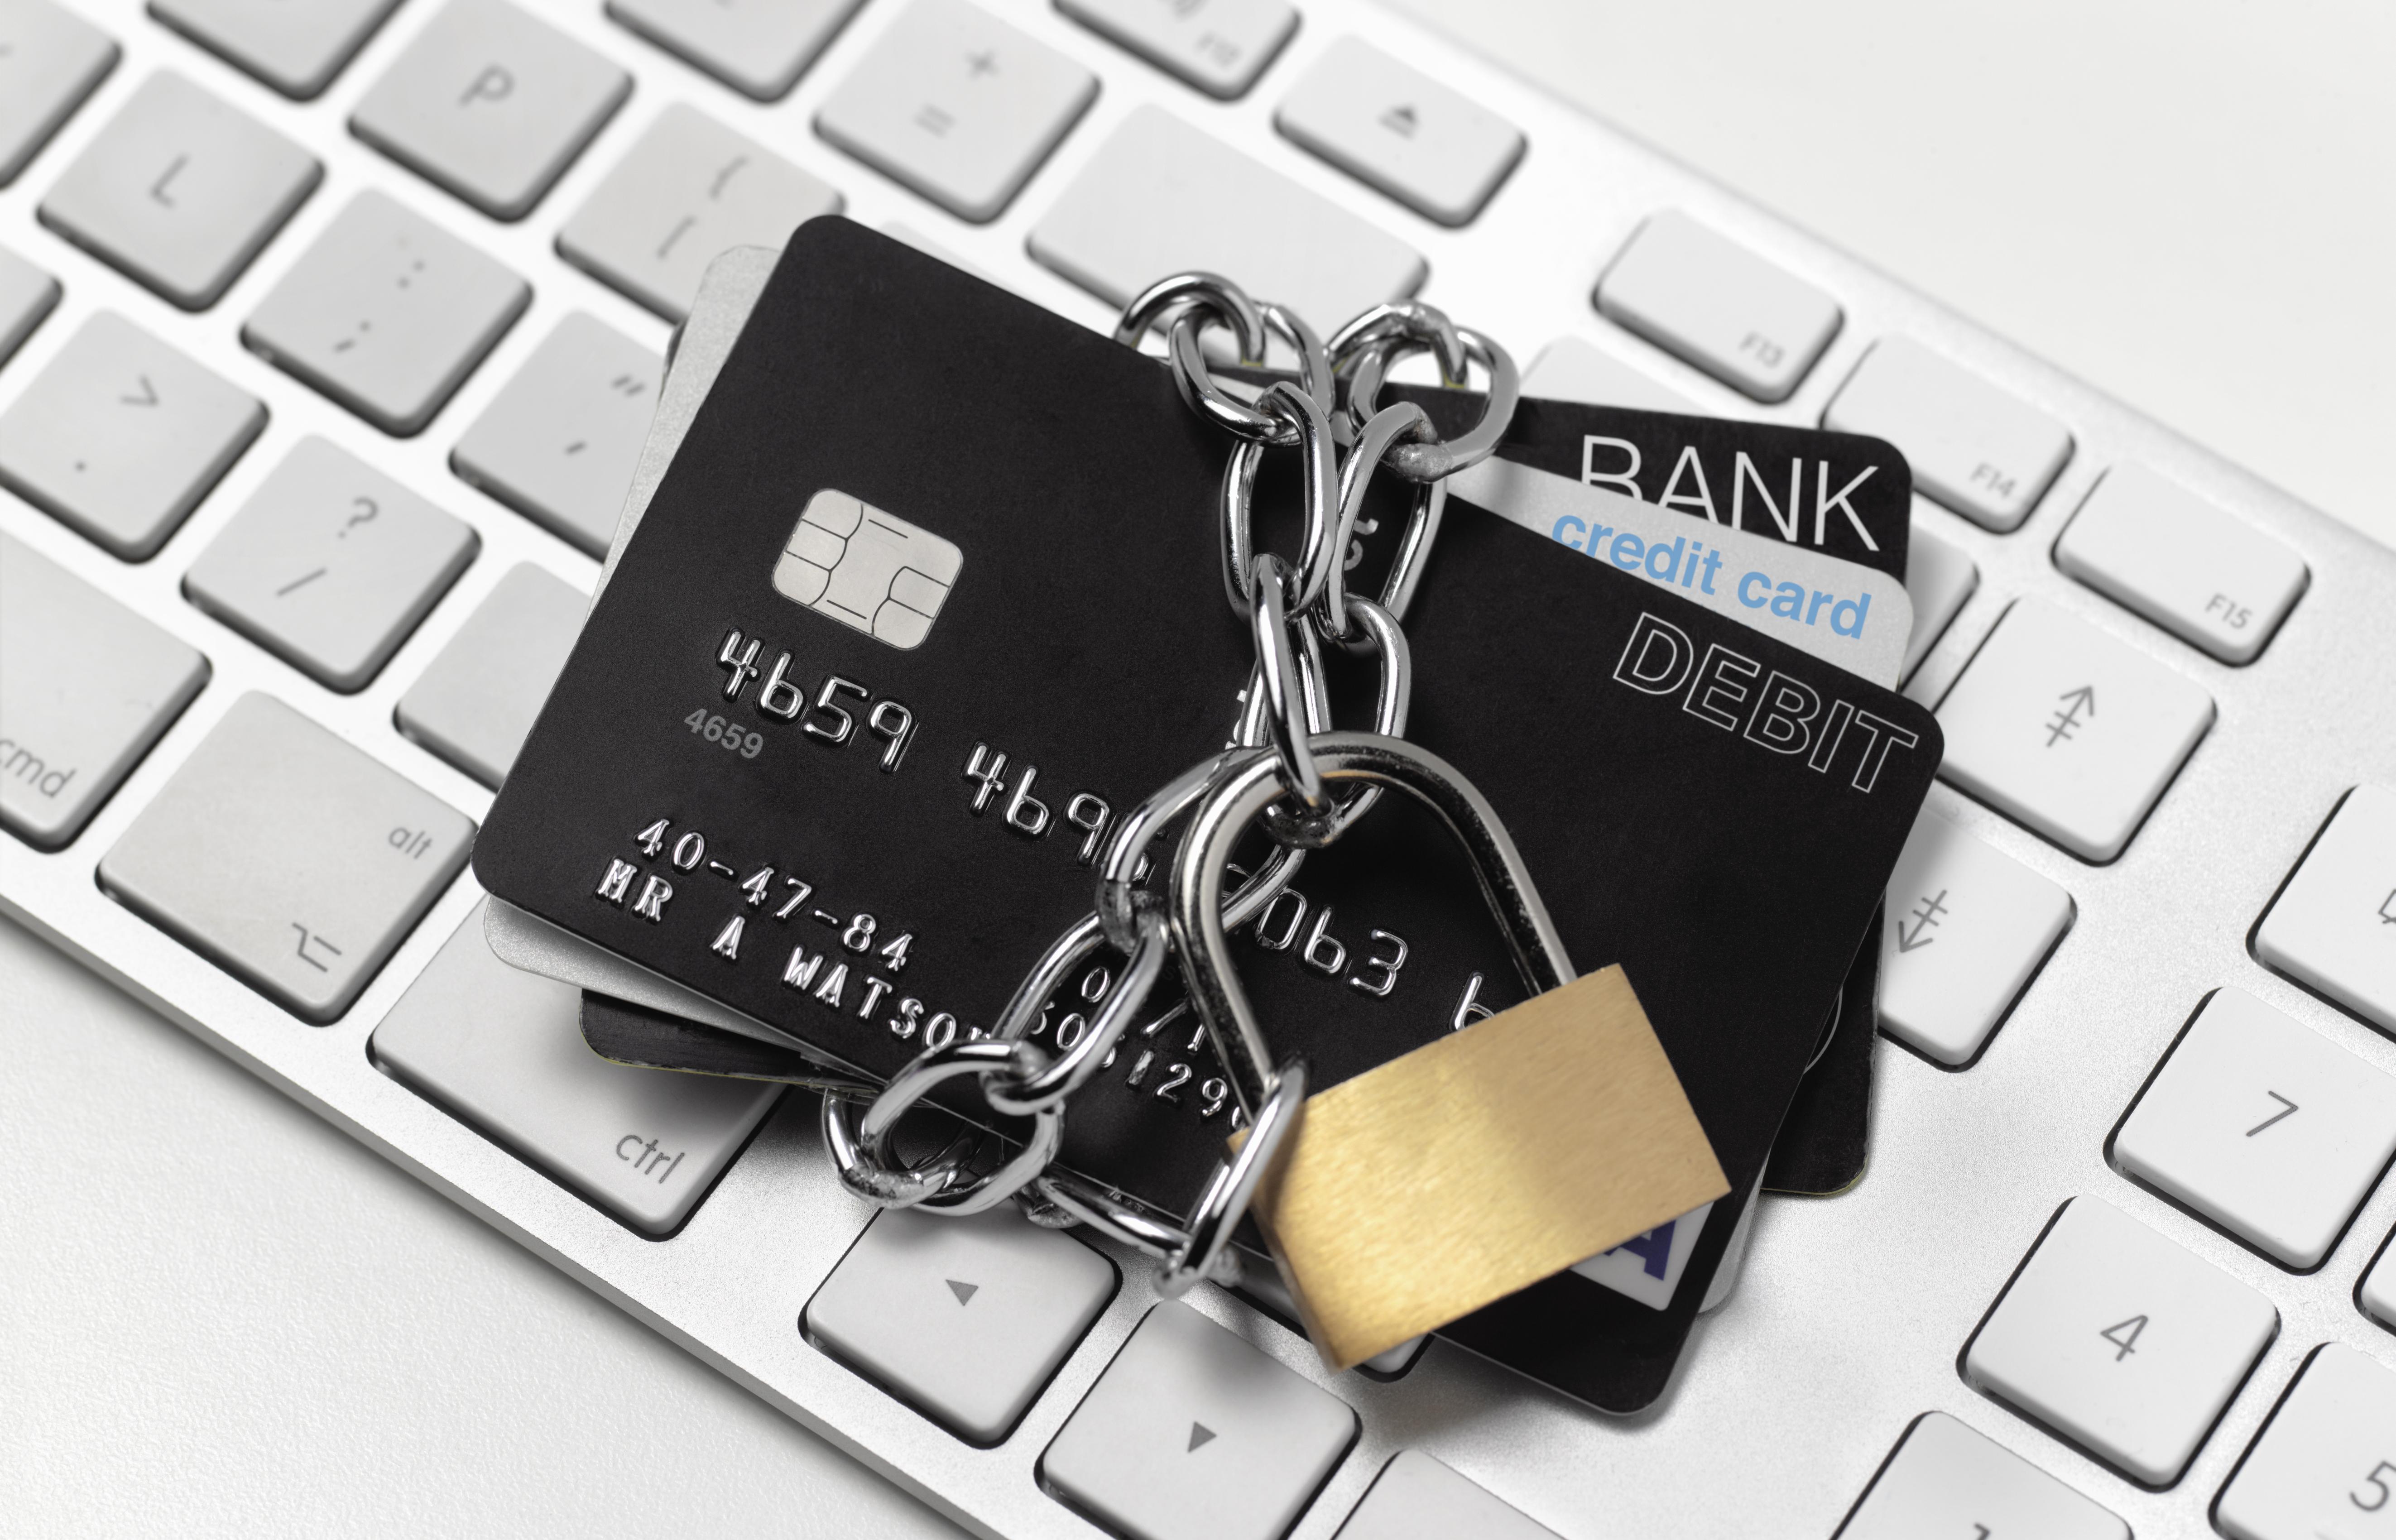 Basic Steps to Take in the Event of Identity Theft